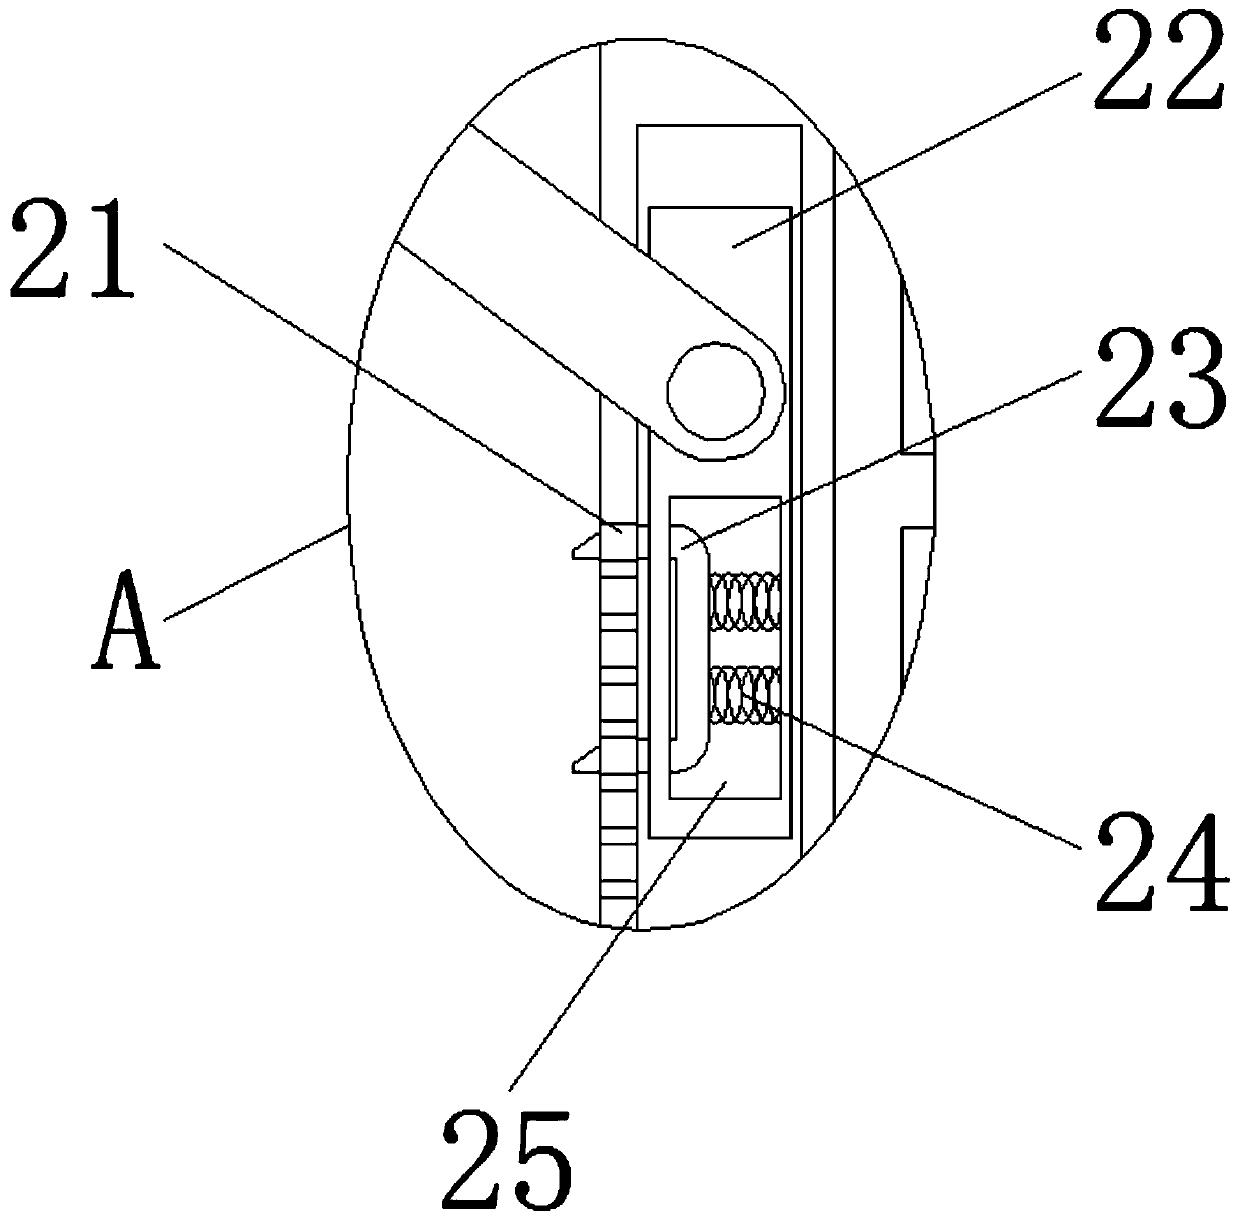 Mold display device for mathematics education